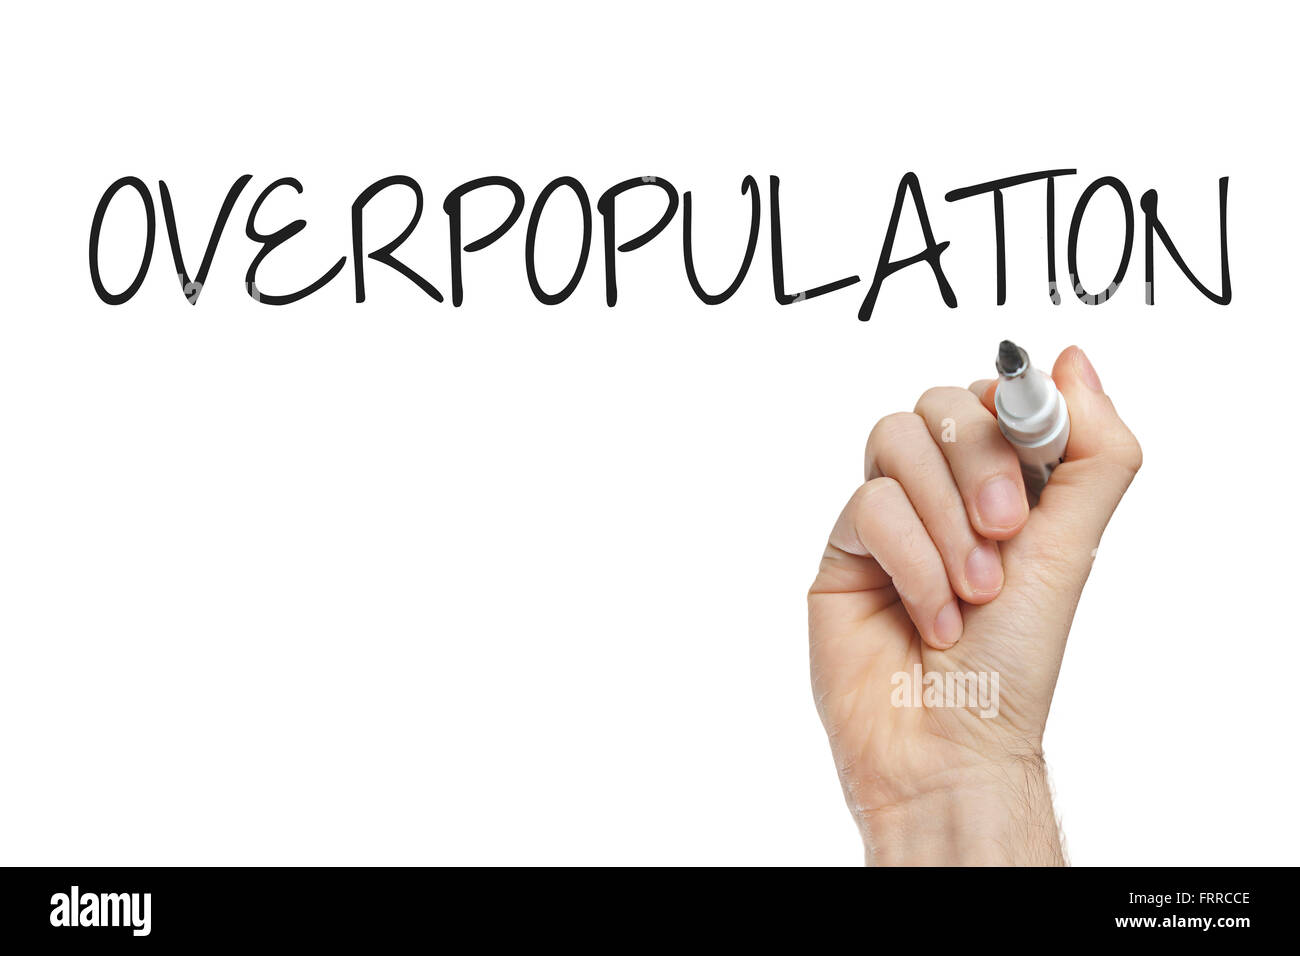 Hand writing overpopulation on a white board Stock Photo